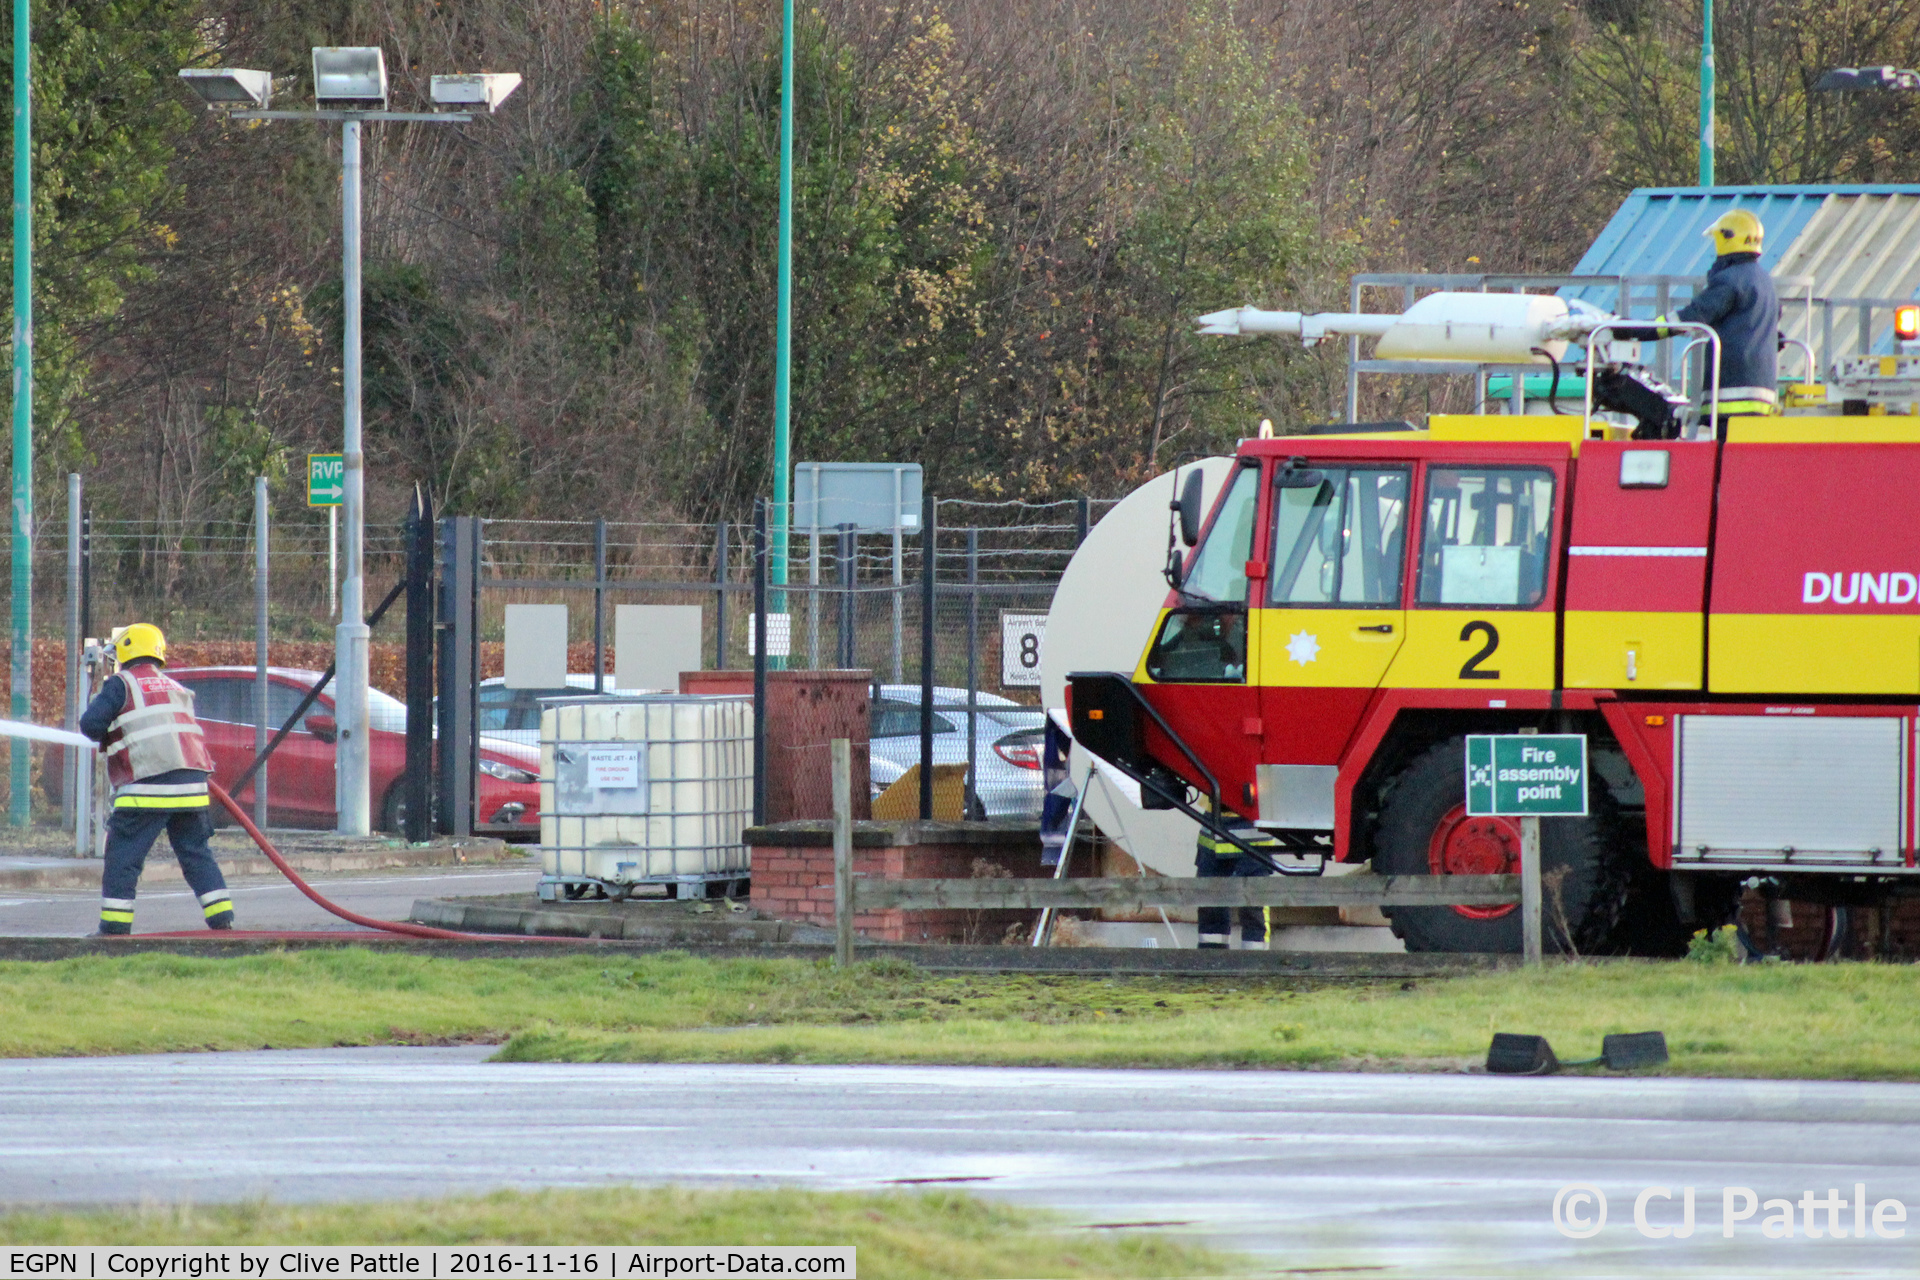 Dundee Airport, Dundee, Scotland United Kingdom (EGPN) - Dundee Fire & Rescue training